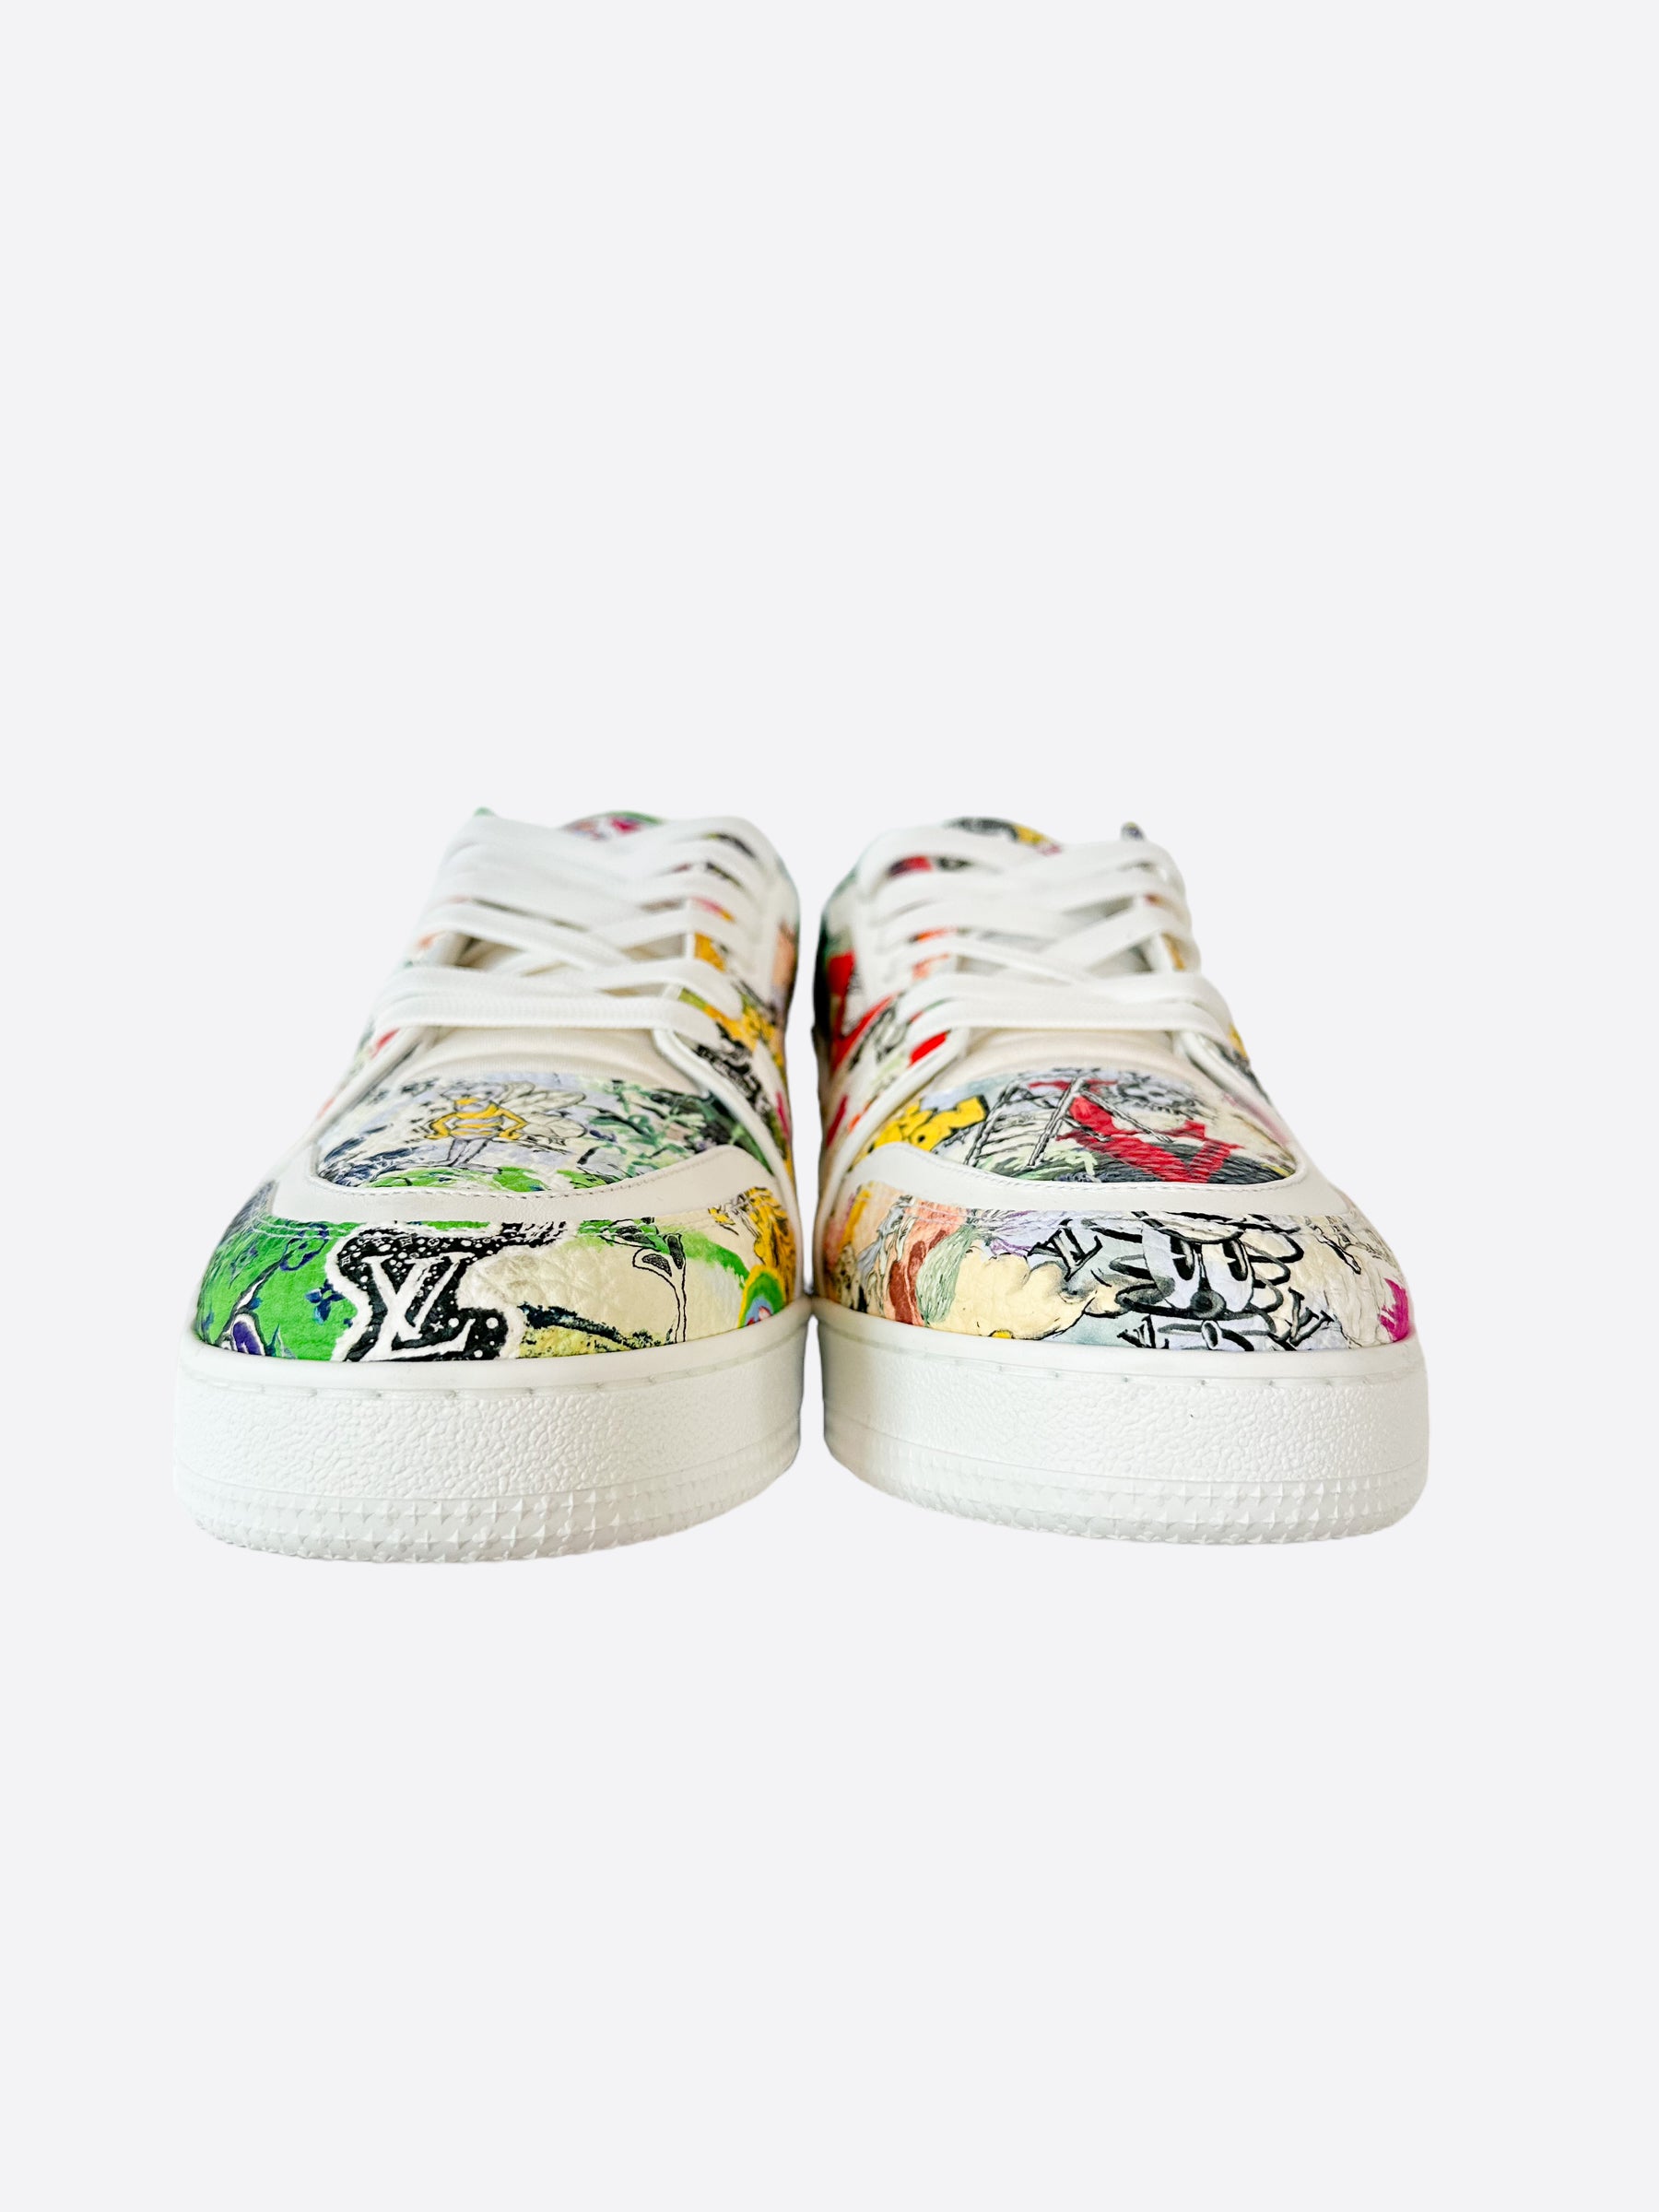 Louis Vuitton LV Trainer Cartoon Sneakers - White Sneakers, Shoes -  LOU764491